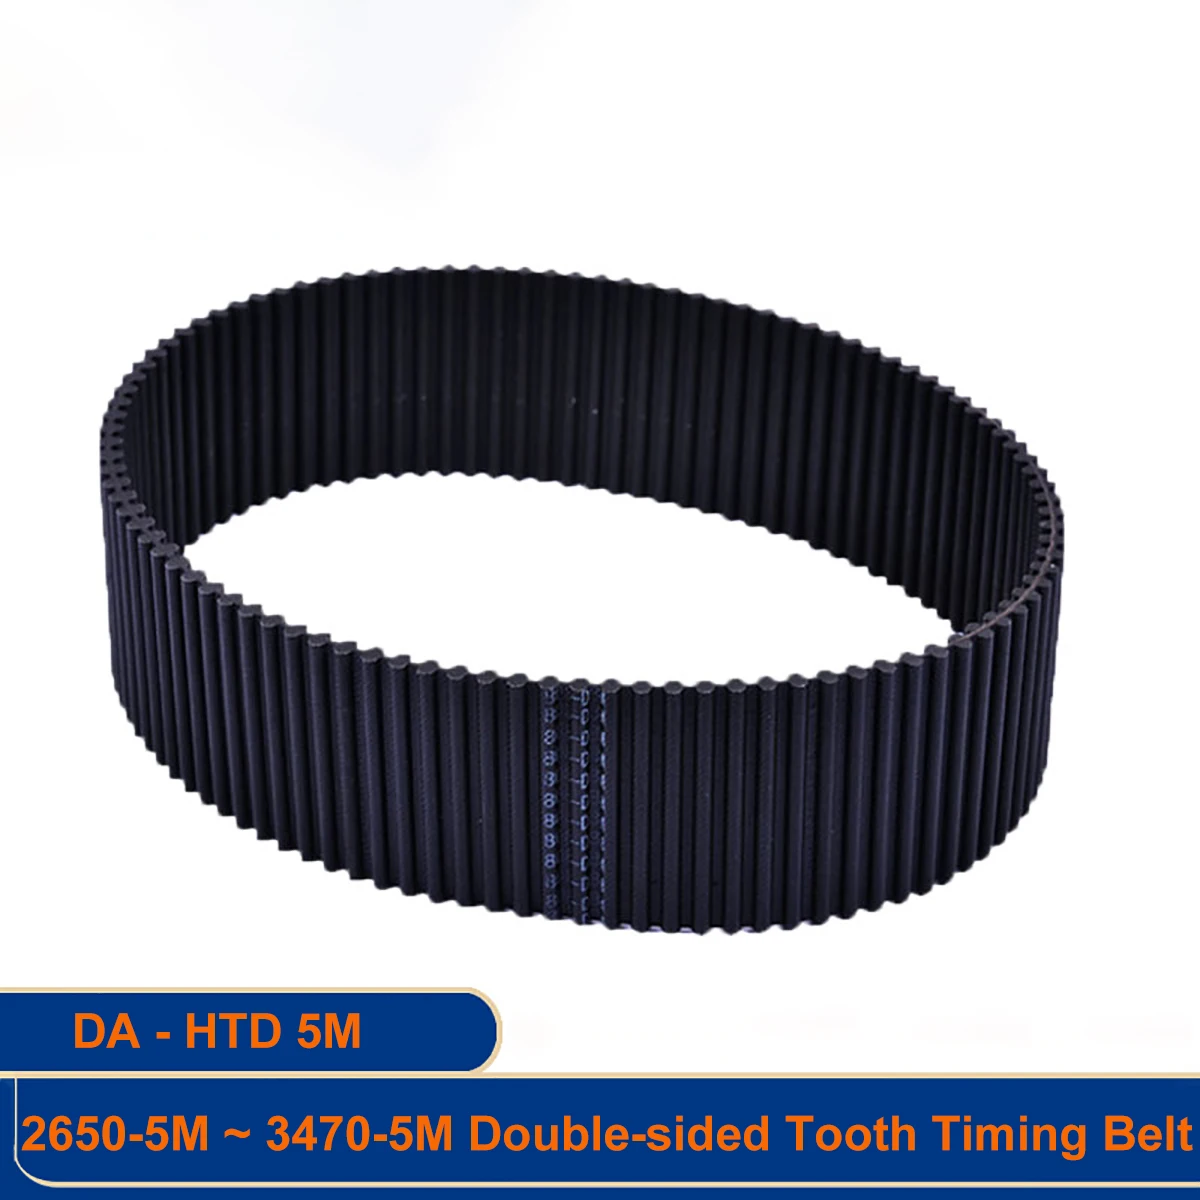 

DA HTD 5M Perimeter 2650 2730 2800 3060 3470mm Double Side Tooth Timing Belt Width 10 15 20 25 30 40mm Synchronous Belt